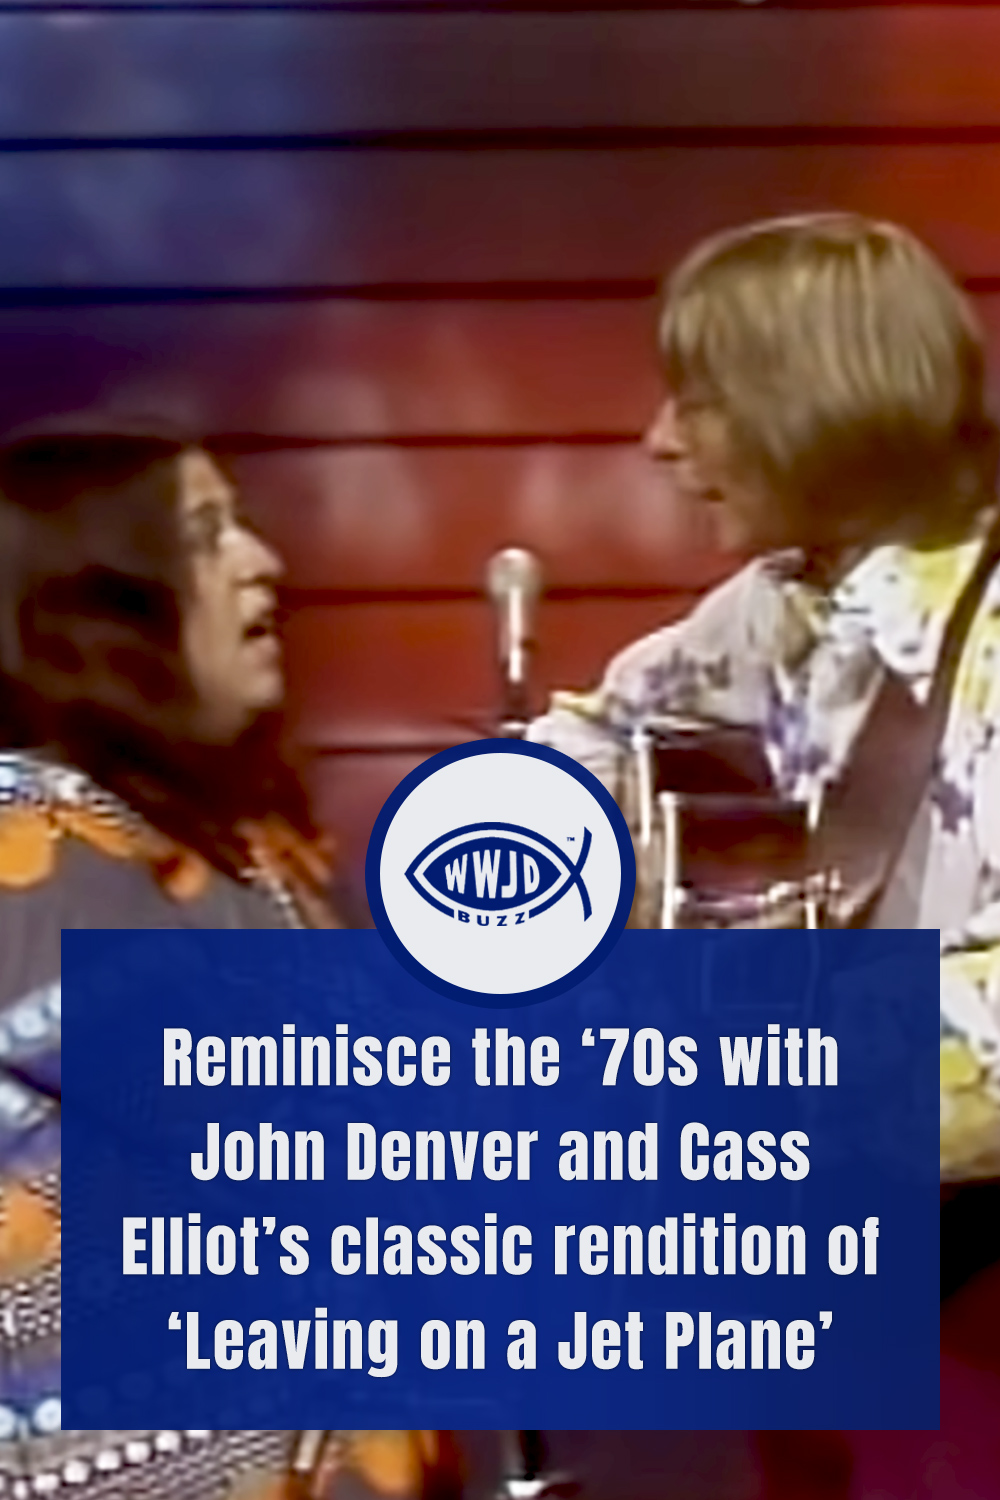 Reminisce the ‘70s with John Denver and Cass Elliot’s classic rendition of ‘Leaving on a Jet Plane’